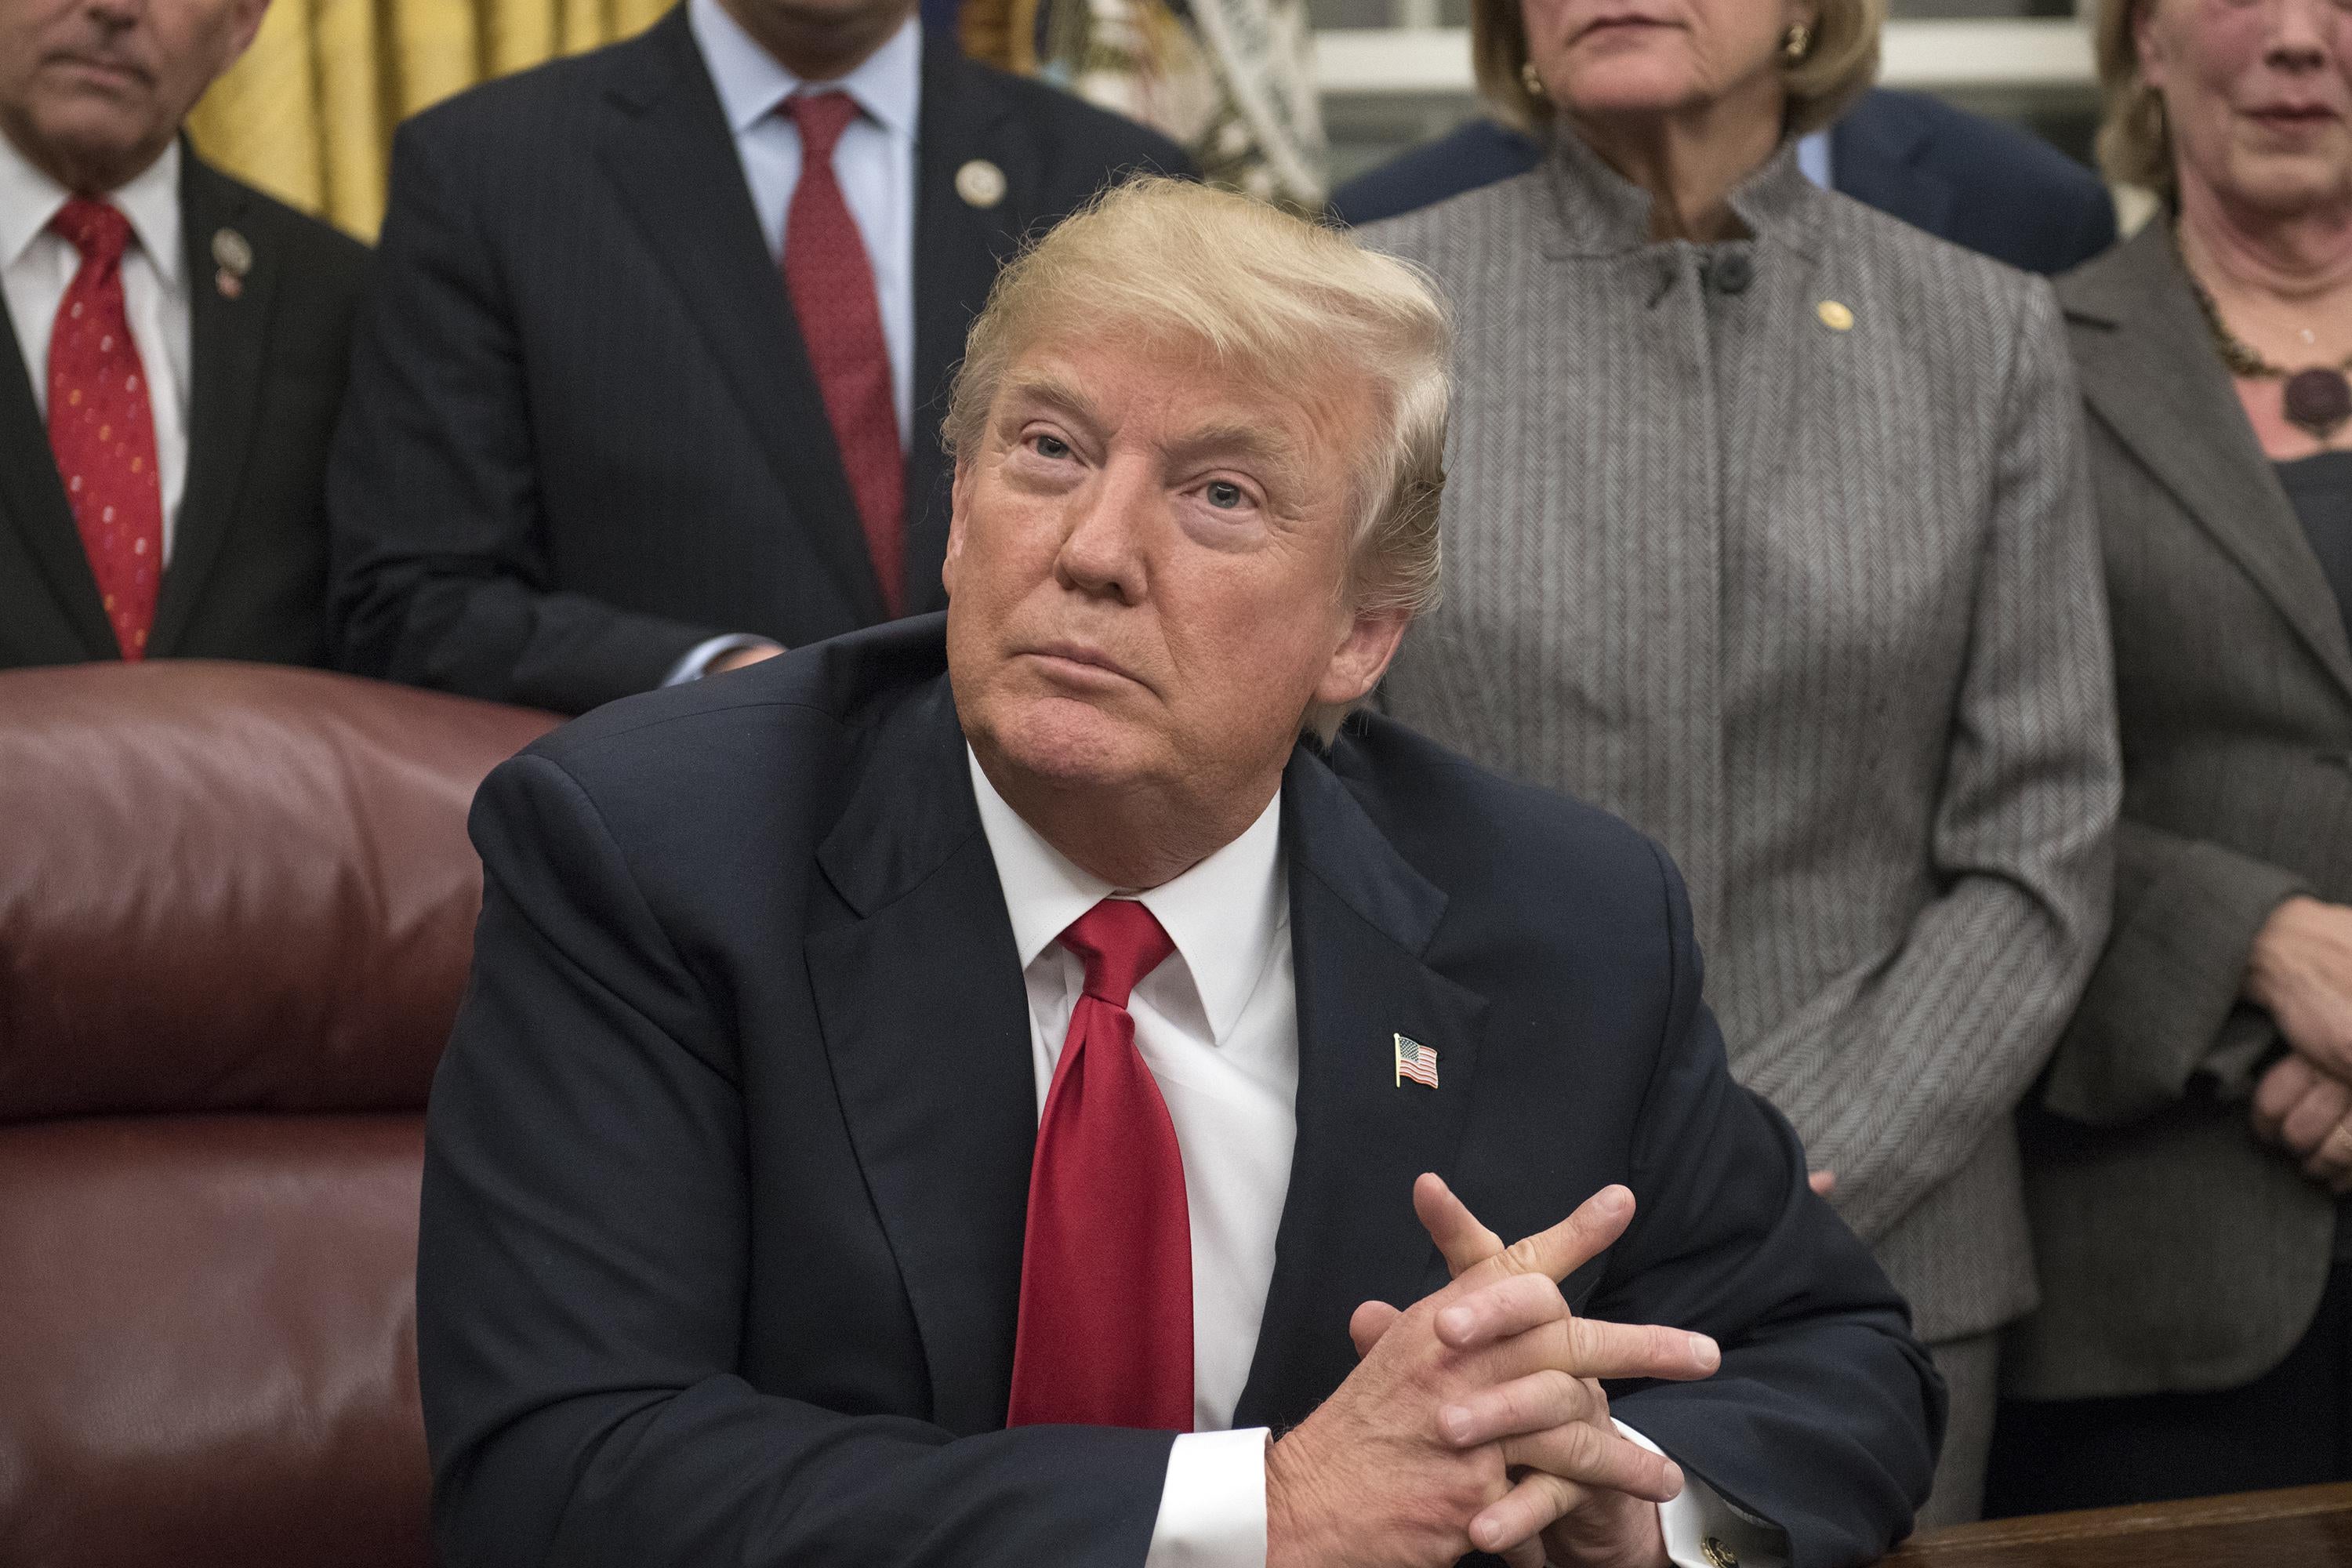 WASHINGTON, DC - JANUARY 10: U.S. President Donald Trump makes remarks in the Oval Office prior to signing the bipartisan Interdict Act, a bill to stop the flow of opioids into the United States, on January 10, 2018 in Washington, D.C.  The Interdict Act will provide Customs and Border Protection agents with the latest screening technology devices used to secure our border from illicit materials, specifically fentanyl, a powerful opioid. (Photo by Ron Sachs-Pool/Getty Images)